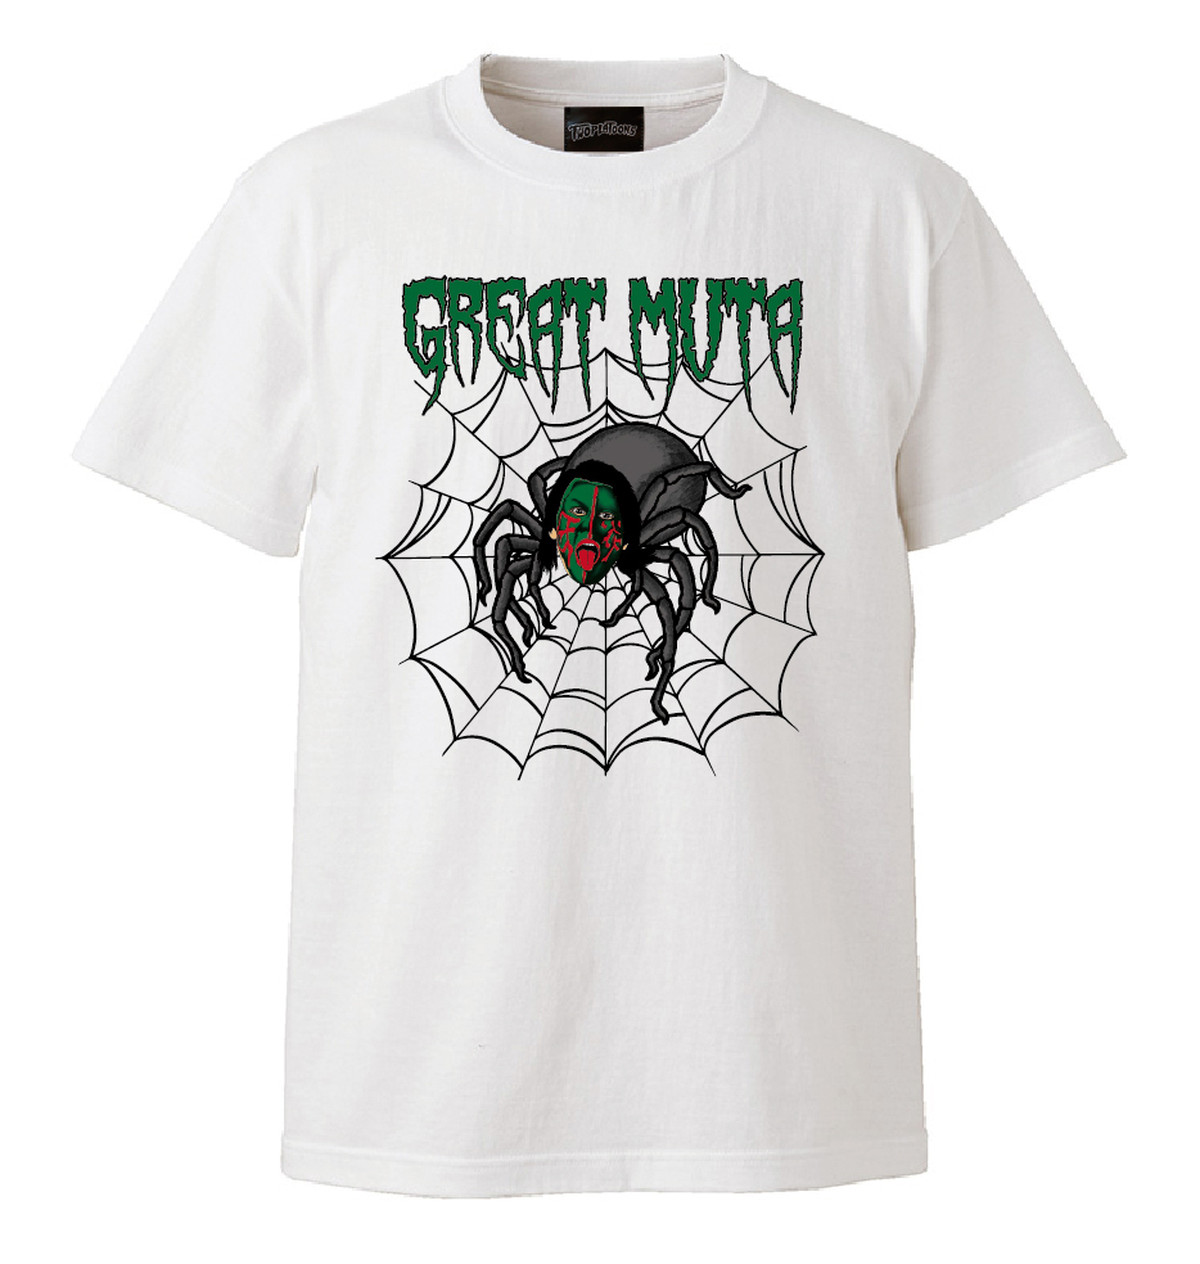 Twoplatoons グレートムタ Spider T White Green Twoplatoons Official Store